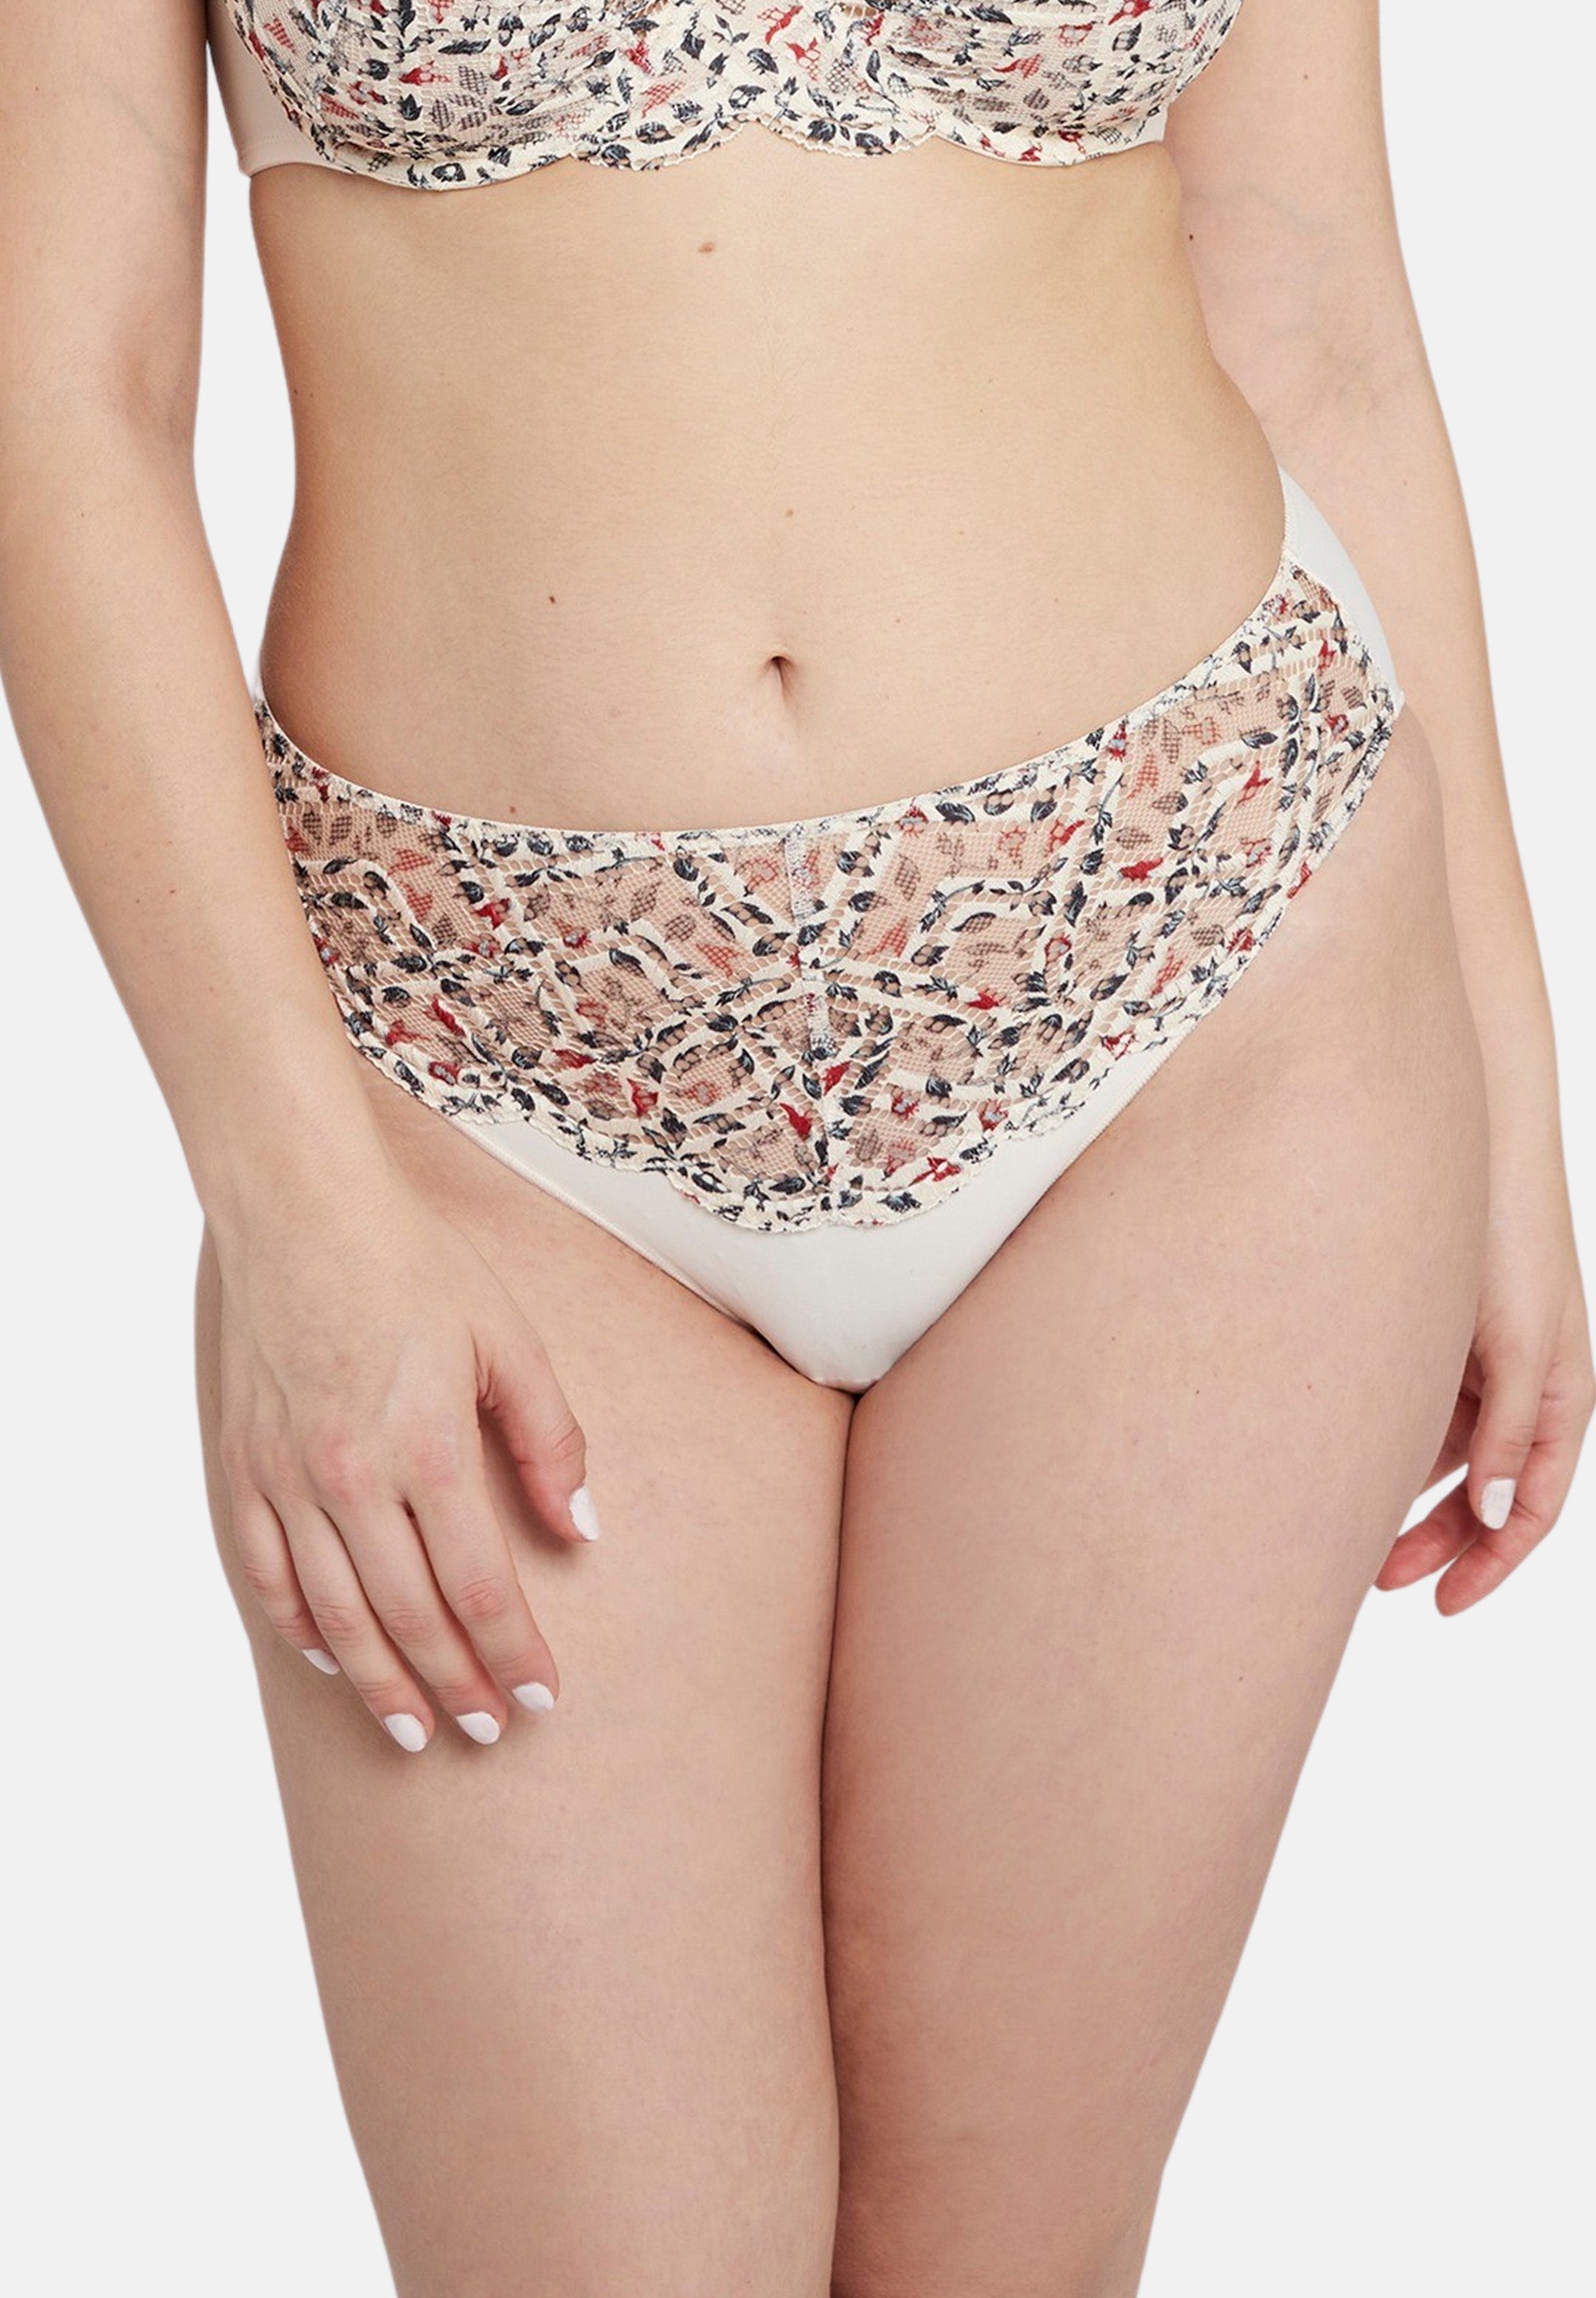 Plus Size - Ivory Lace Cheeky Panty - Torrid